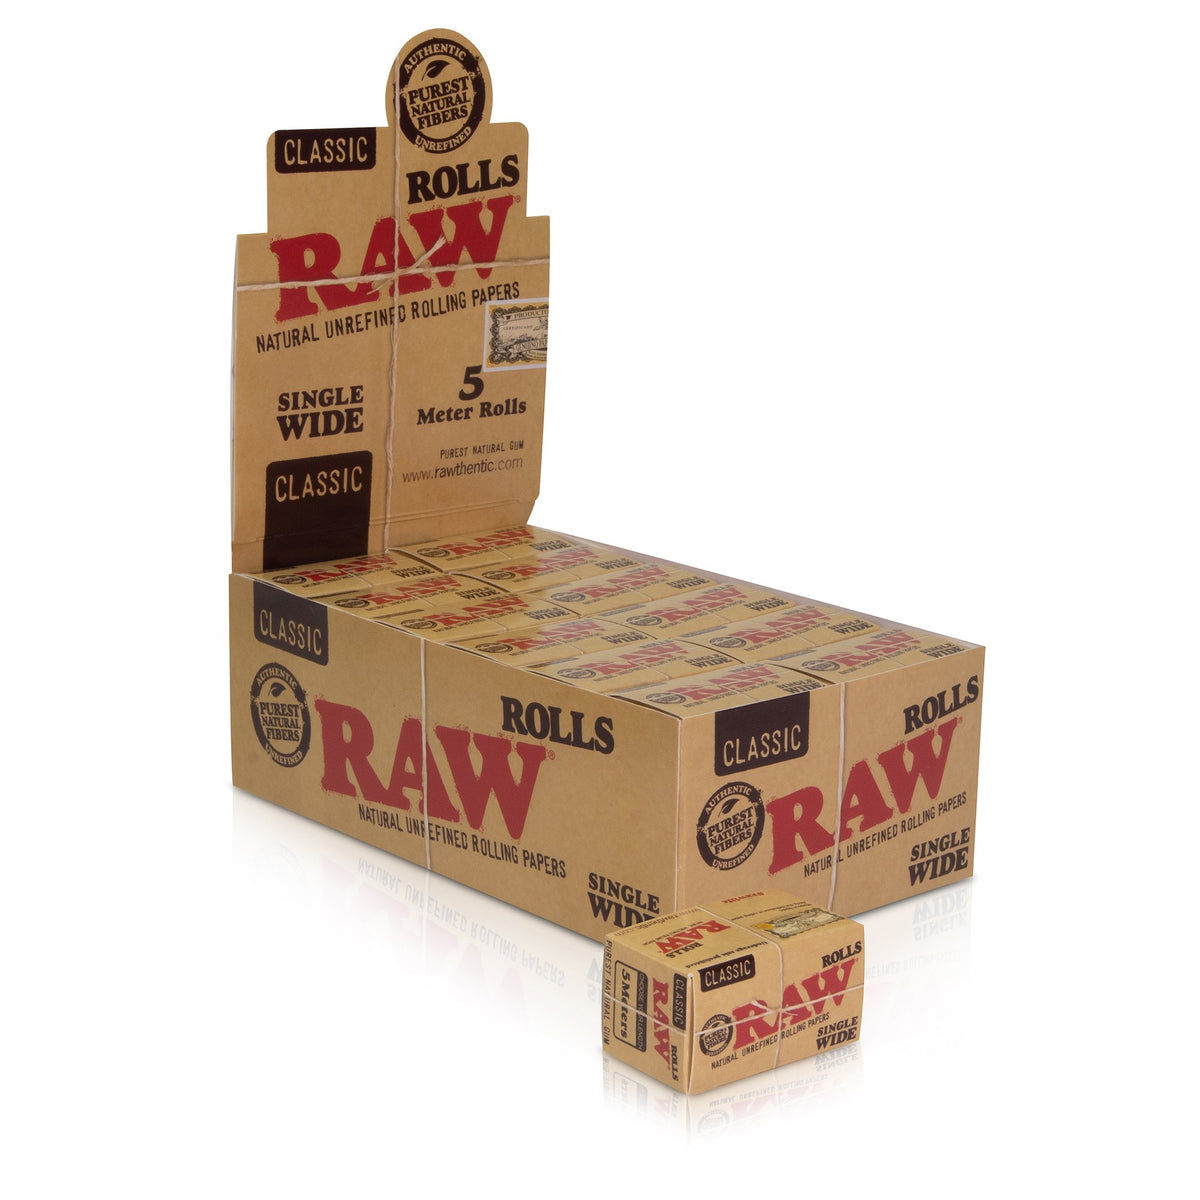 RAW Classic Paper Rolls Single Wide - 5 Meters Rolling Papers WAR00345-MUSA01 esd-official